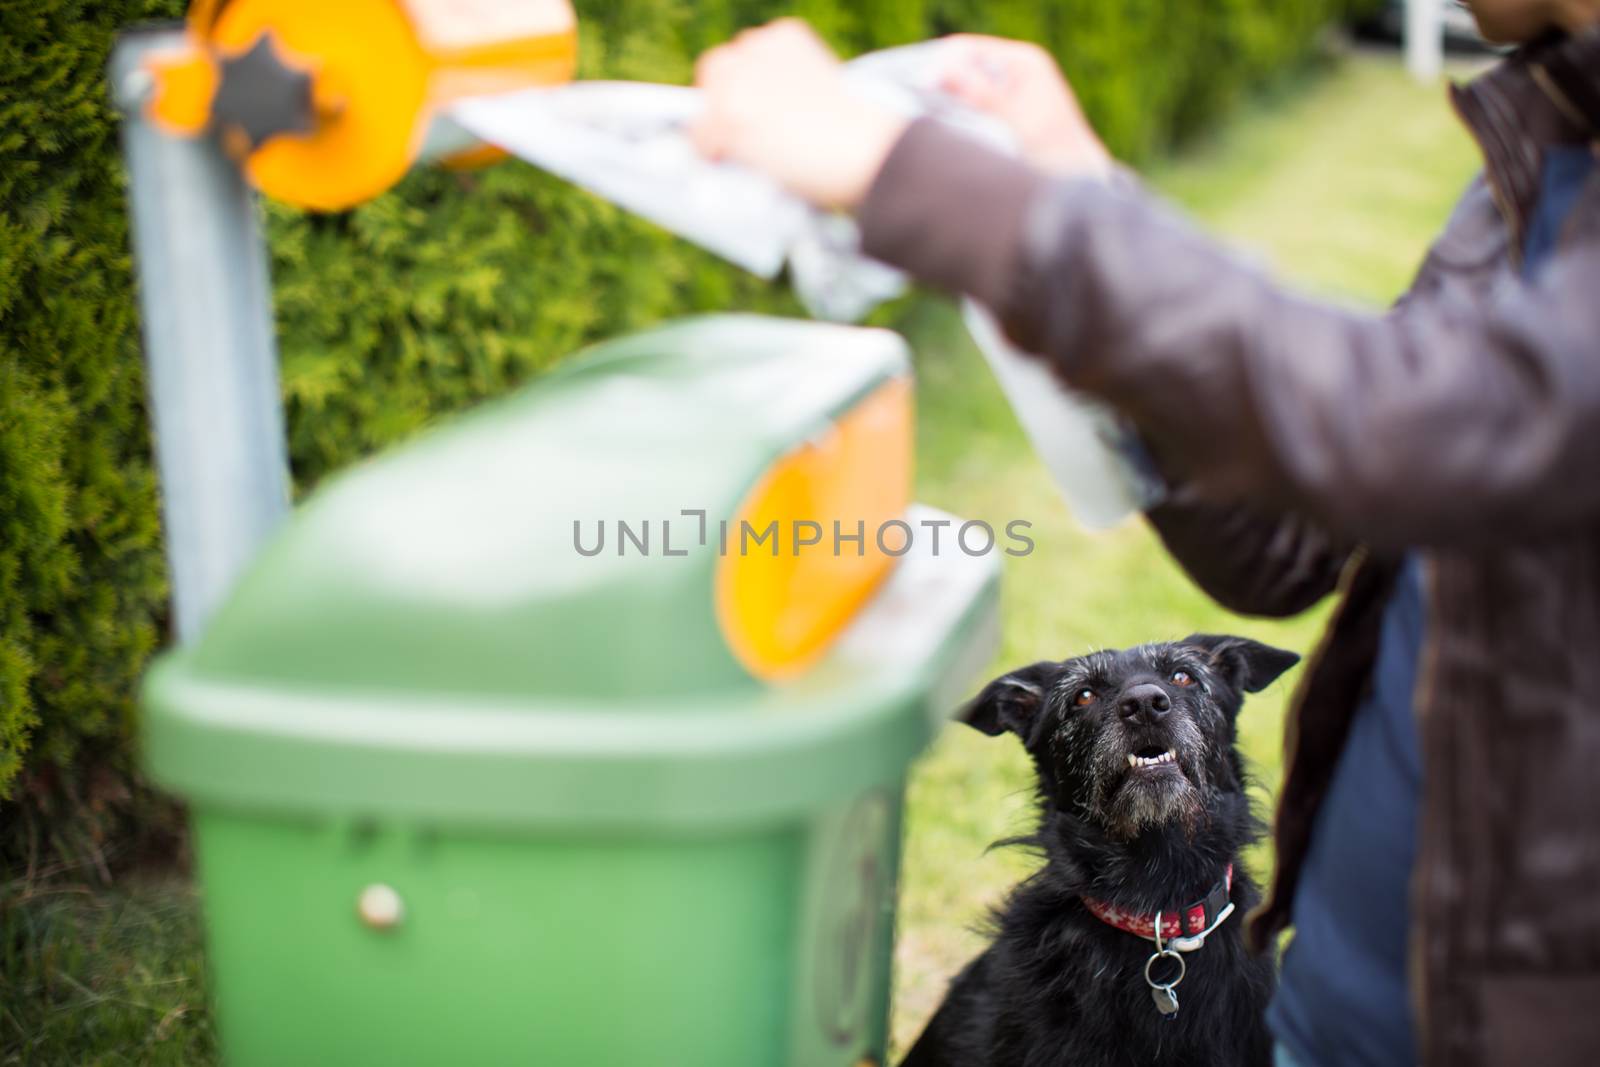 Do not let your dog faul! - Young woman grabbing a plastic bag in a park to tidy up after her dog later